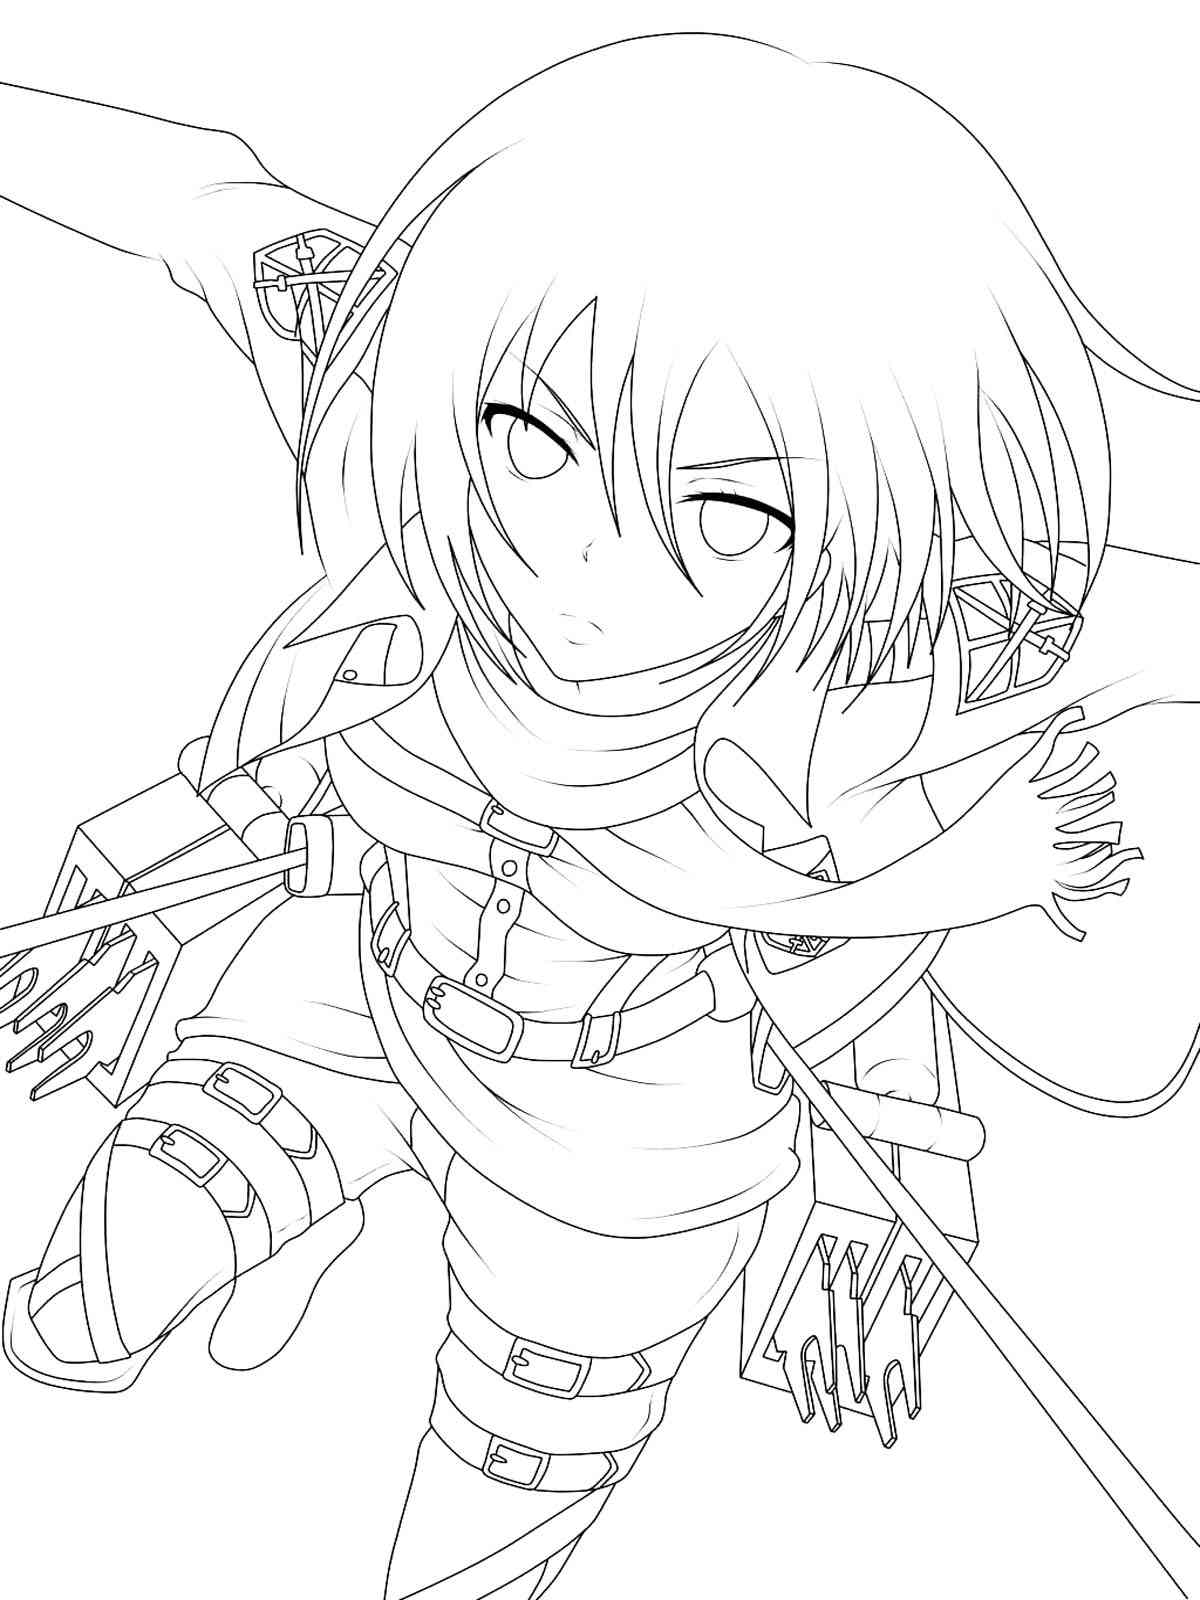 Mikasa Ackerman from Attack On Titan coloring page